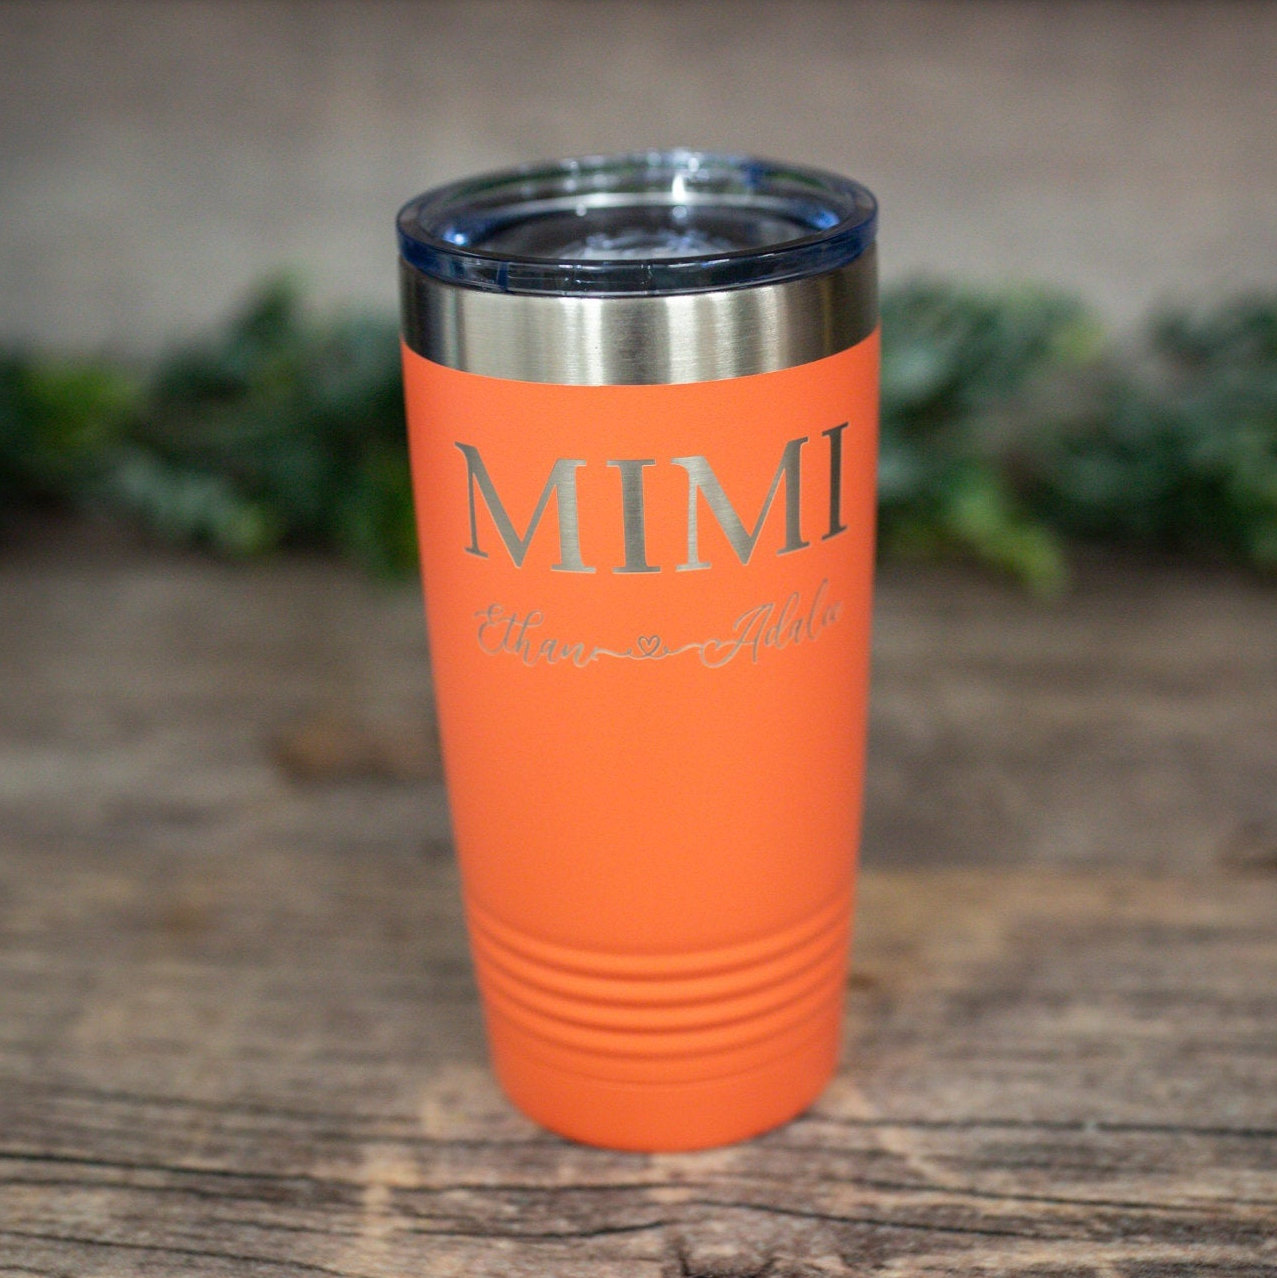 https://3cetching.com/wp-content/uploads/2021/07/mimi-personalized-with-kids-names-engraved-stainless-steel-tumbler-mimi-gift-proud-mimi-mug-60f7800b.jpg